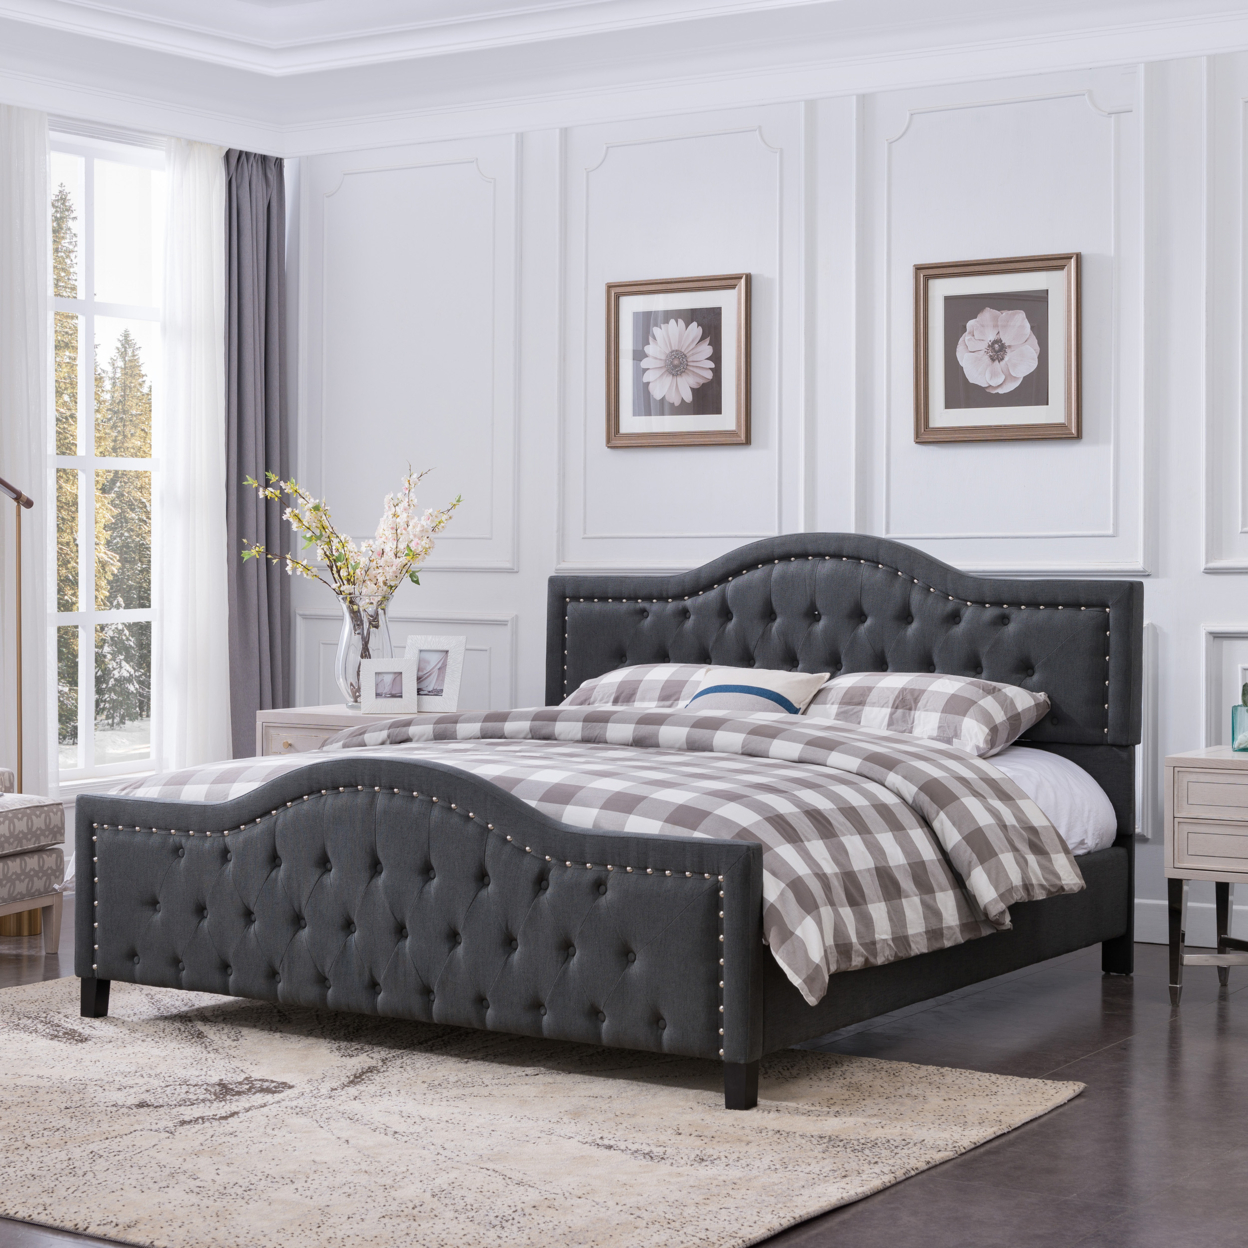 Mason Fully-Upholstered Traditional Queen-Sized Bed Frame